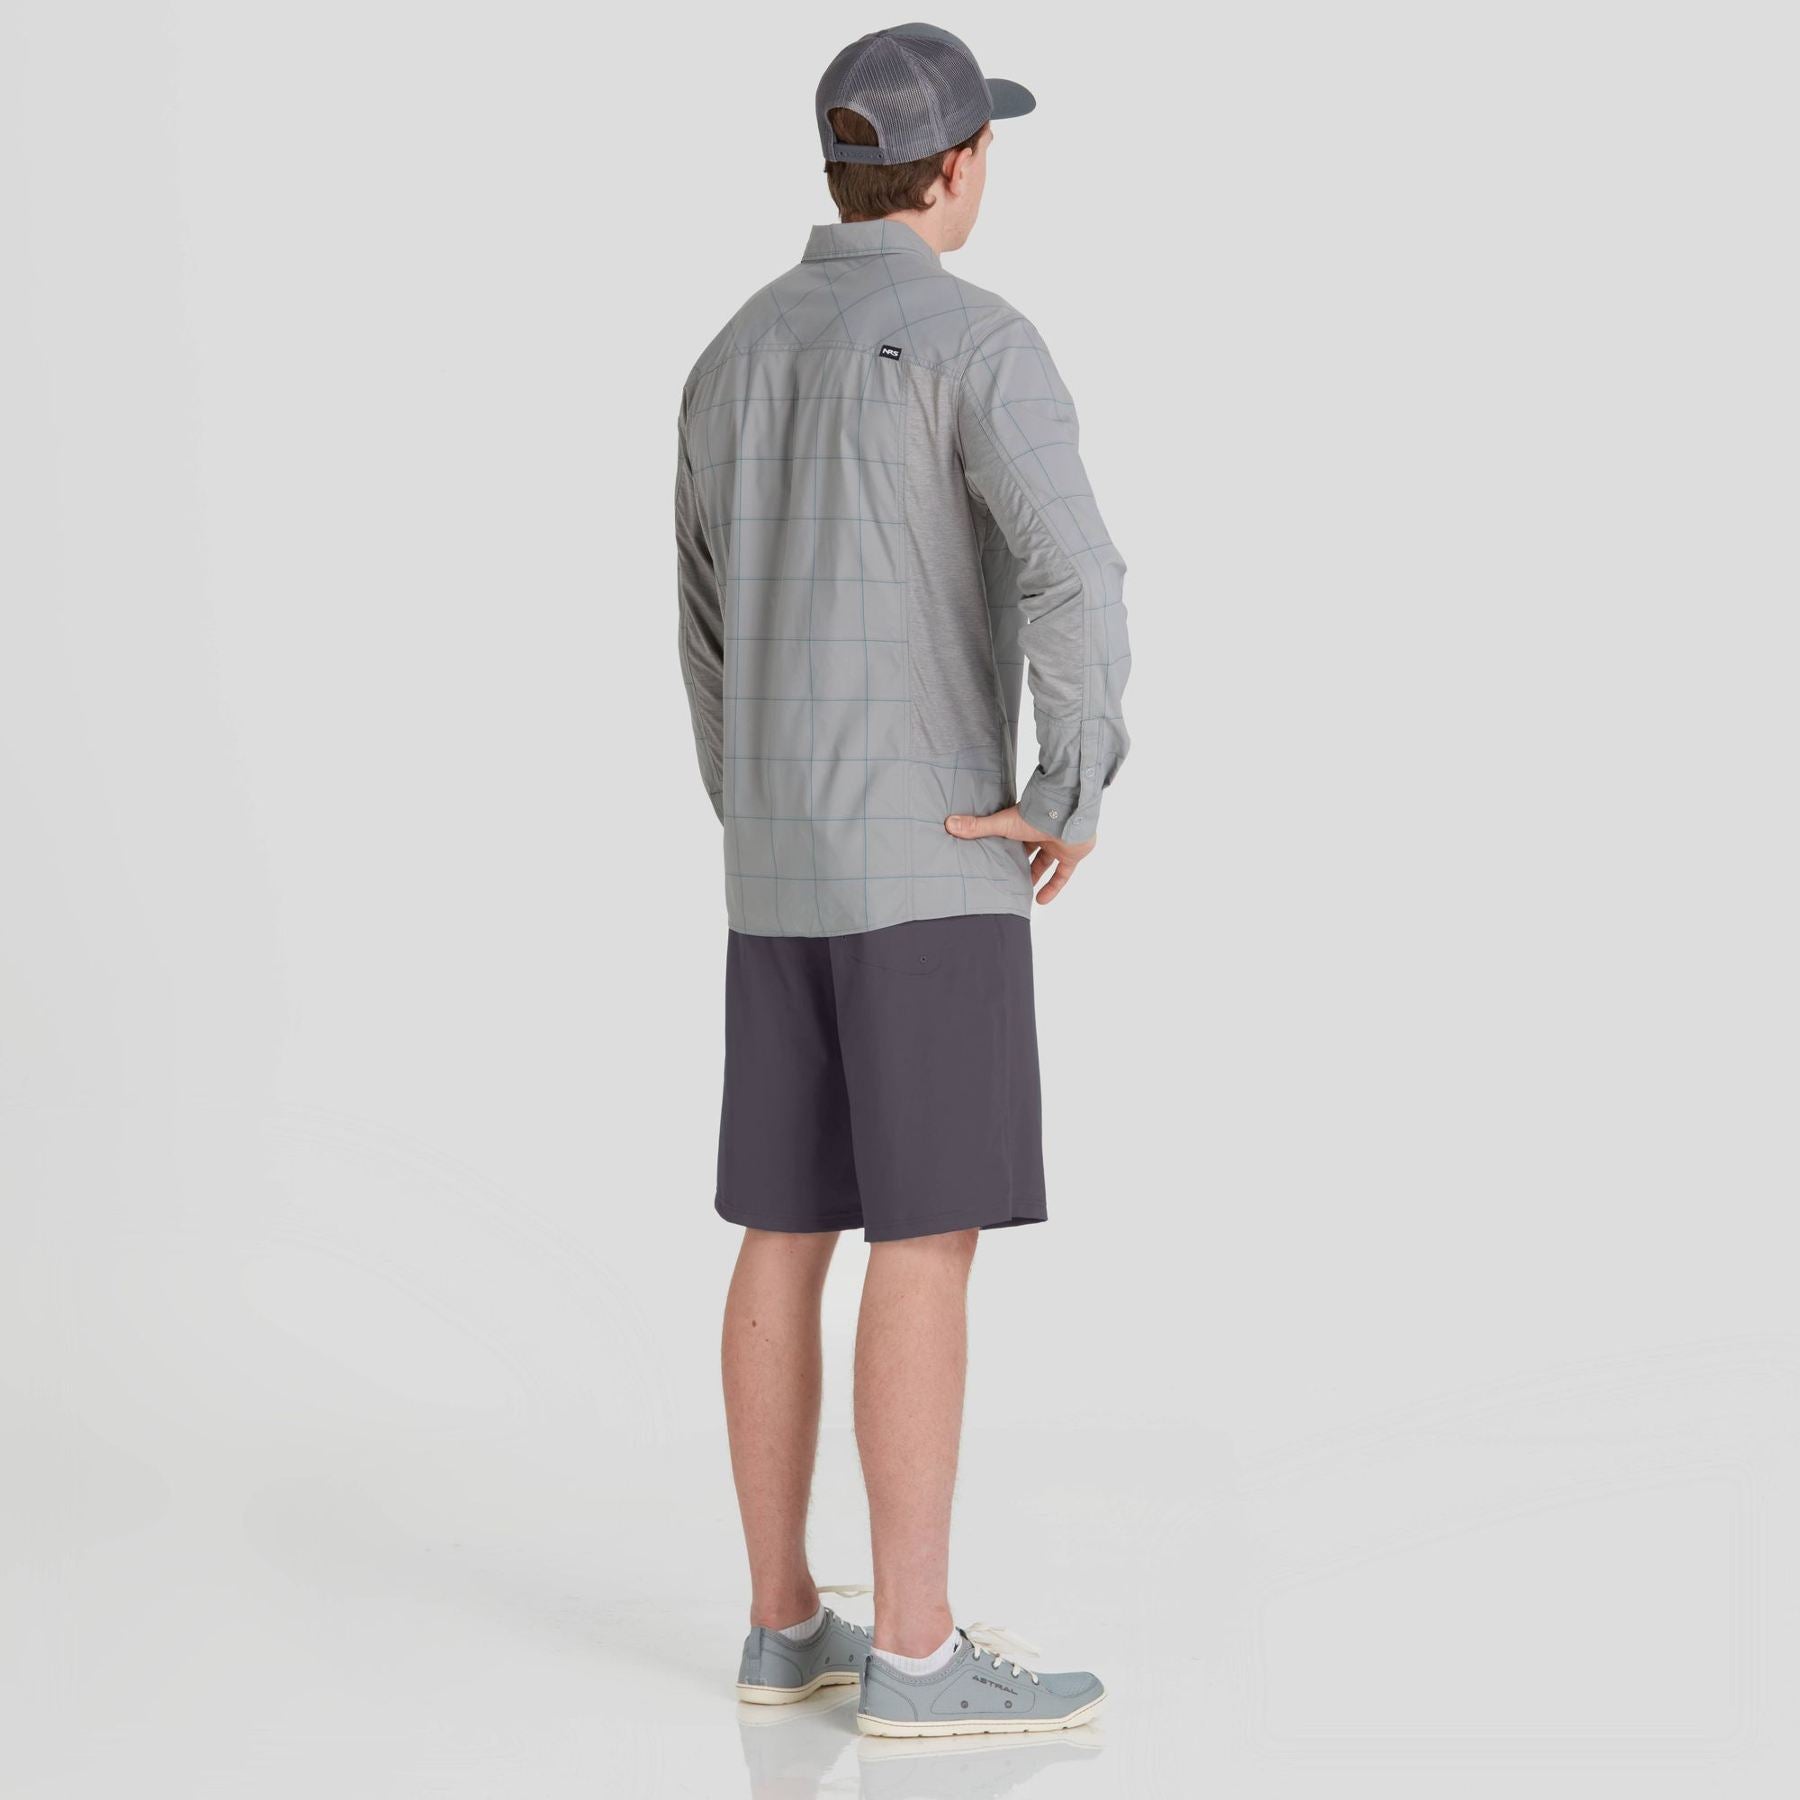 NRS Guide Shorts, Men's